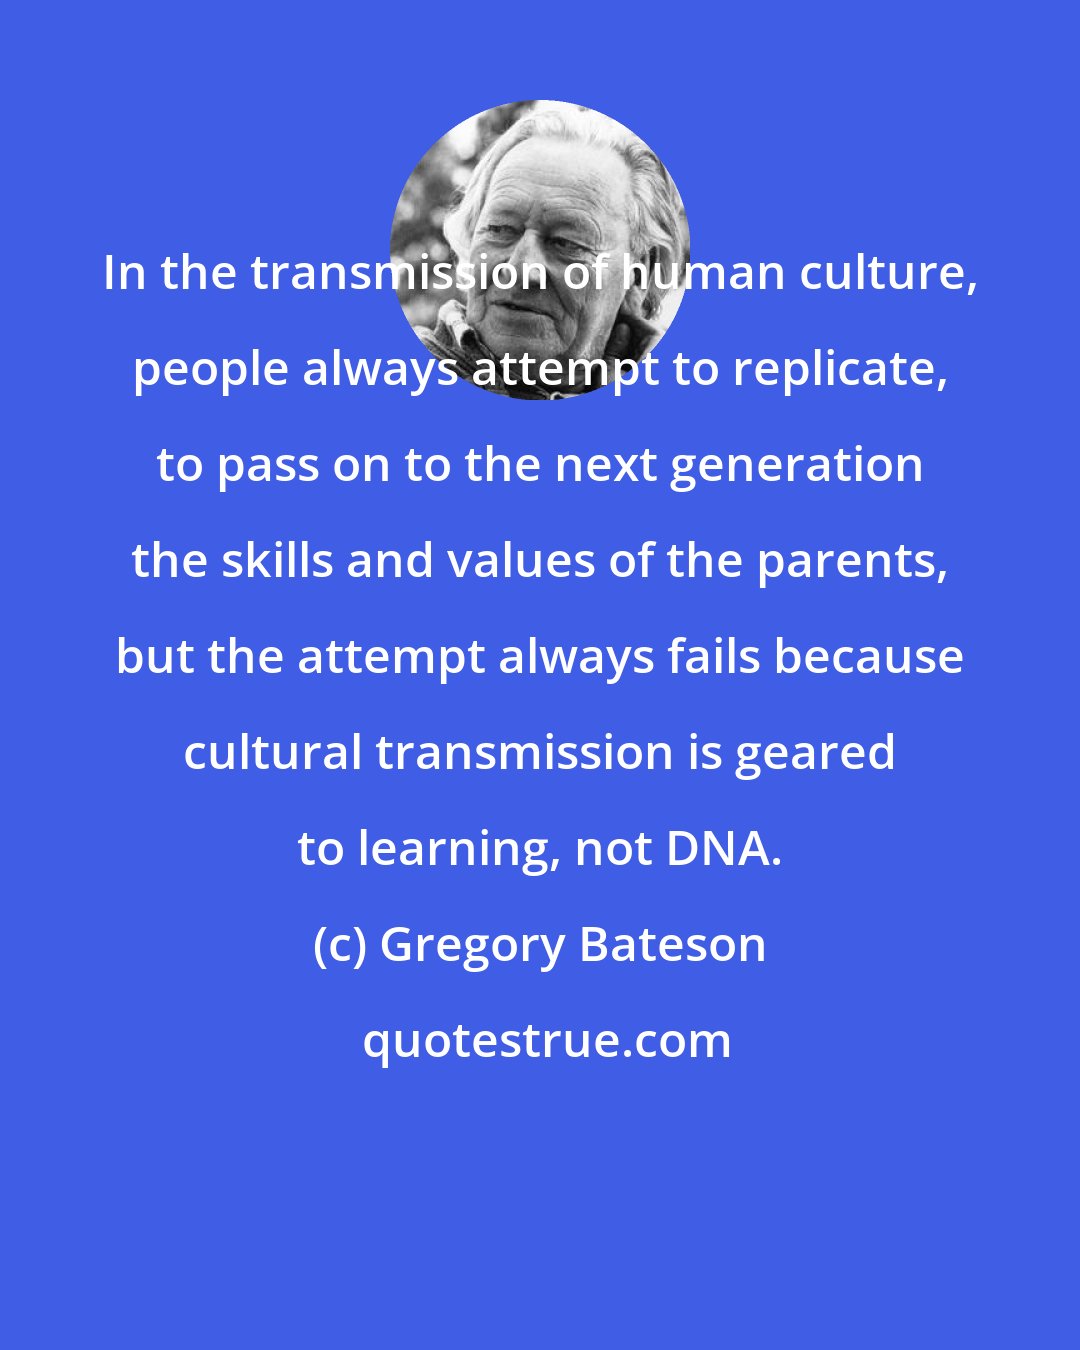 Gregory Bateson: In the transmission of human culture, people always attempt to replicate, to pass on to the next generation the skills and values of the parents, but the attempt always fails because cultural transmission is geared to learning, not DNA.